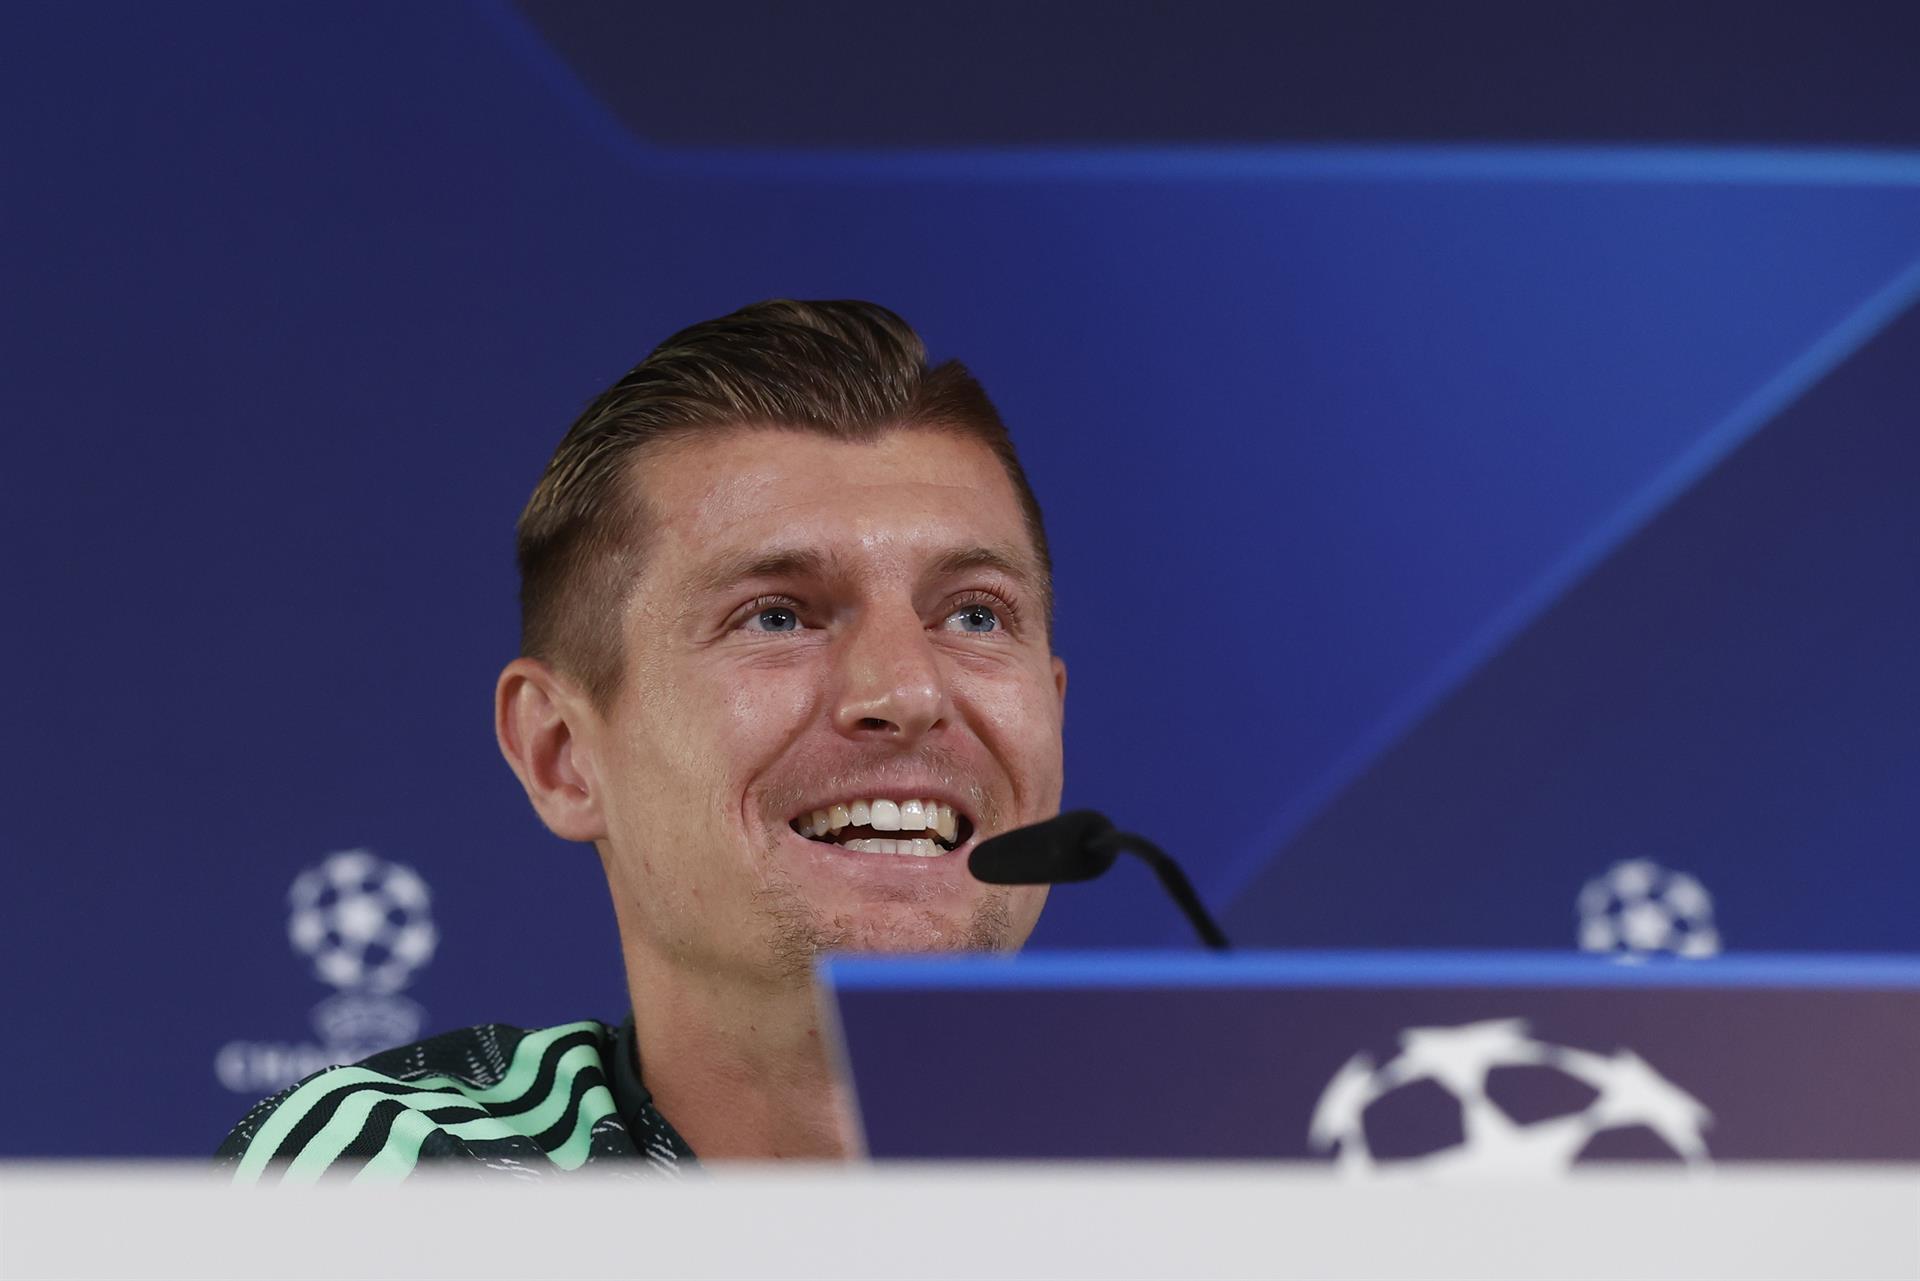 Kroos, critical with Germany: "They could play better"